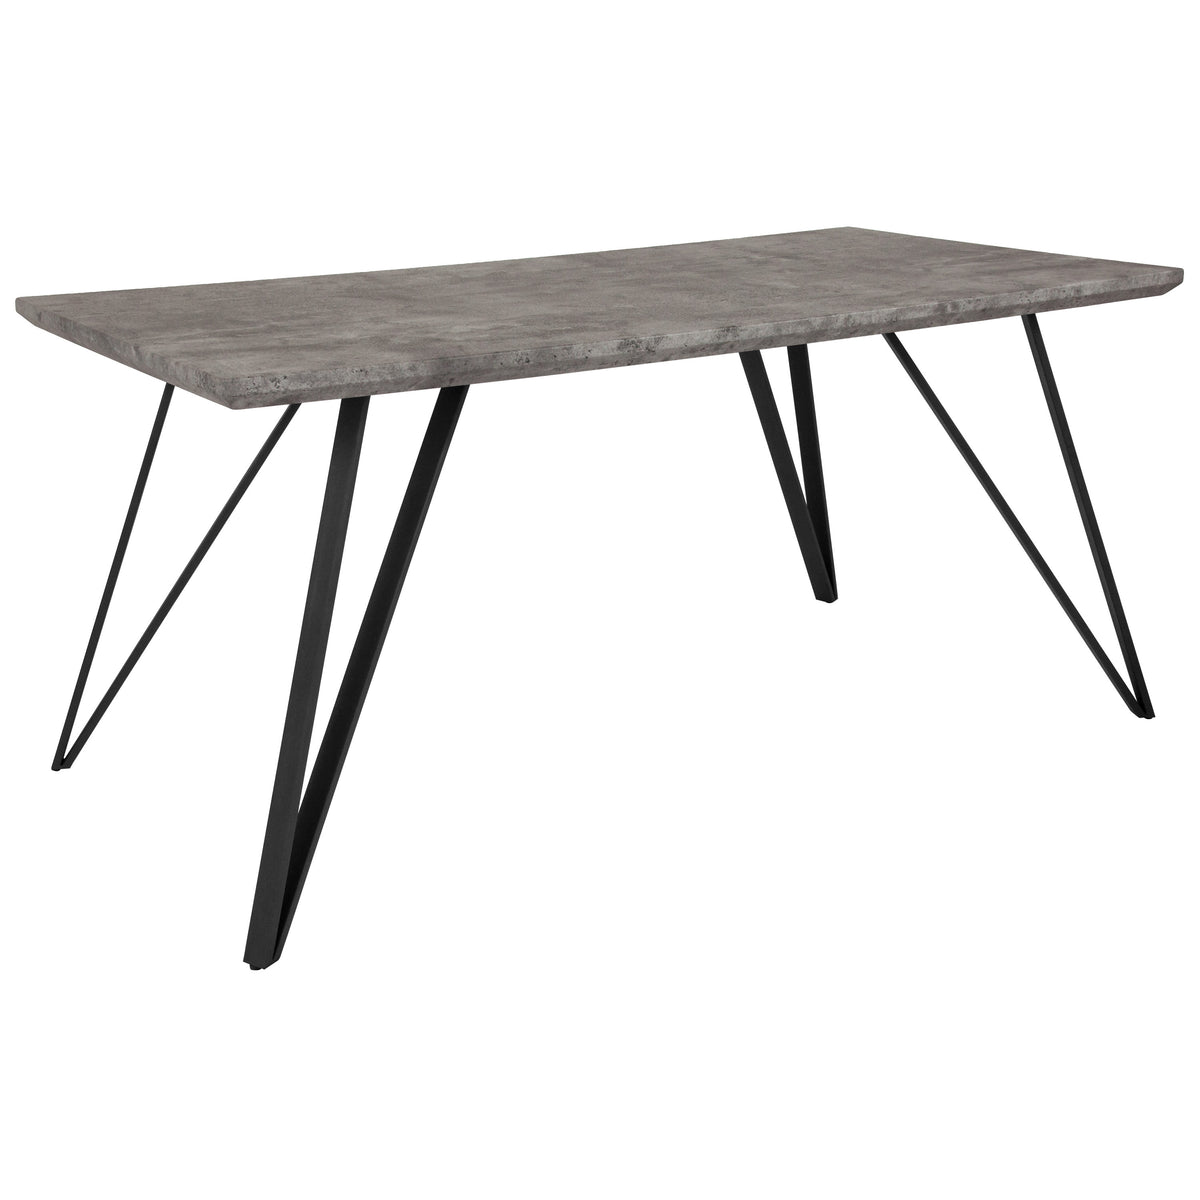 Faux Concrete |#| 31.5inch x 63inch Rectangular Dining Table in Faux Concrete Finish